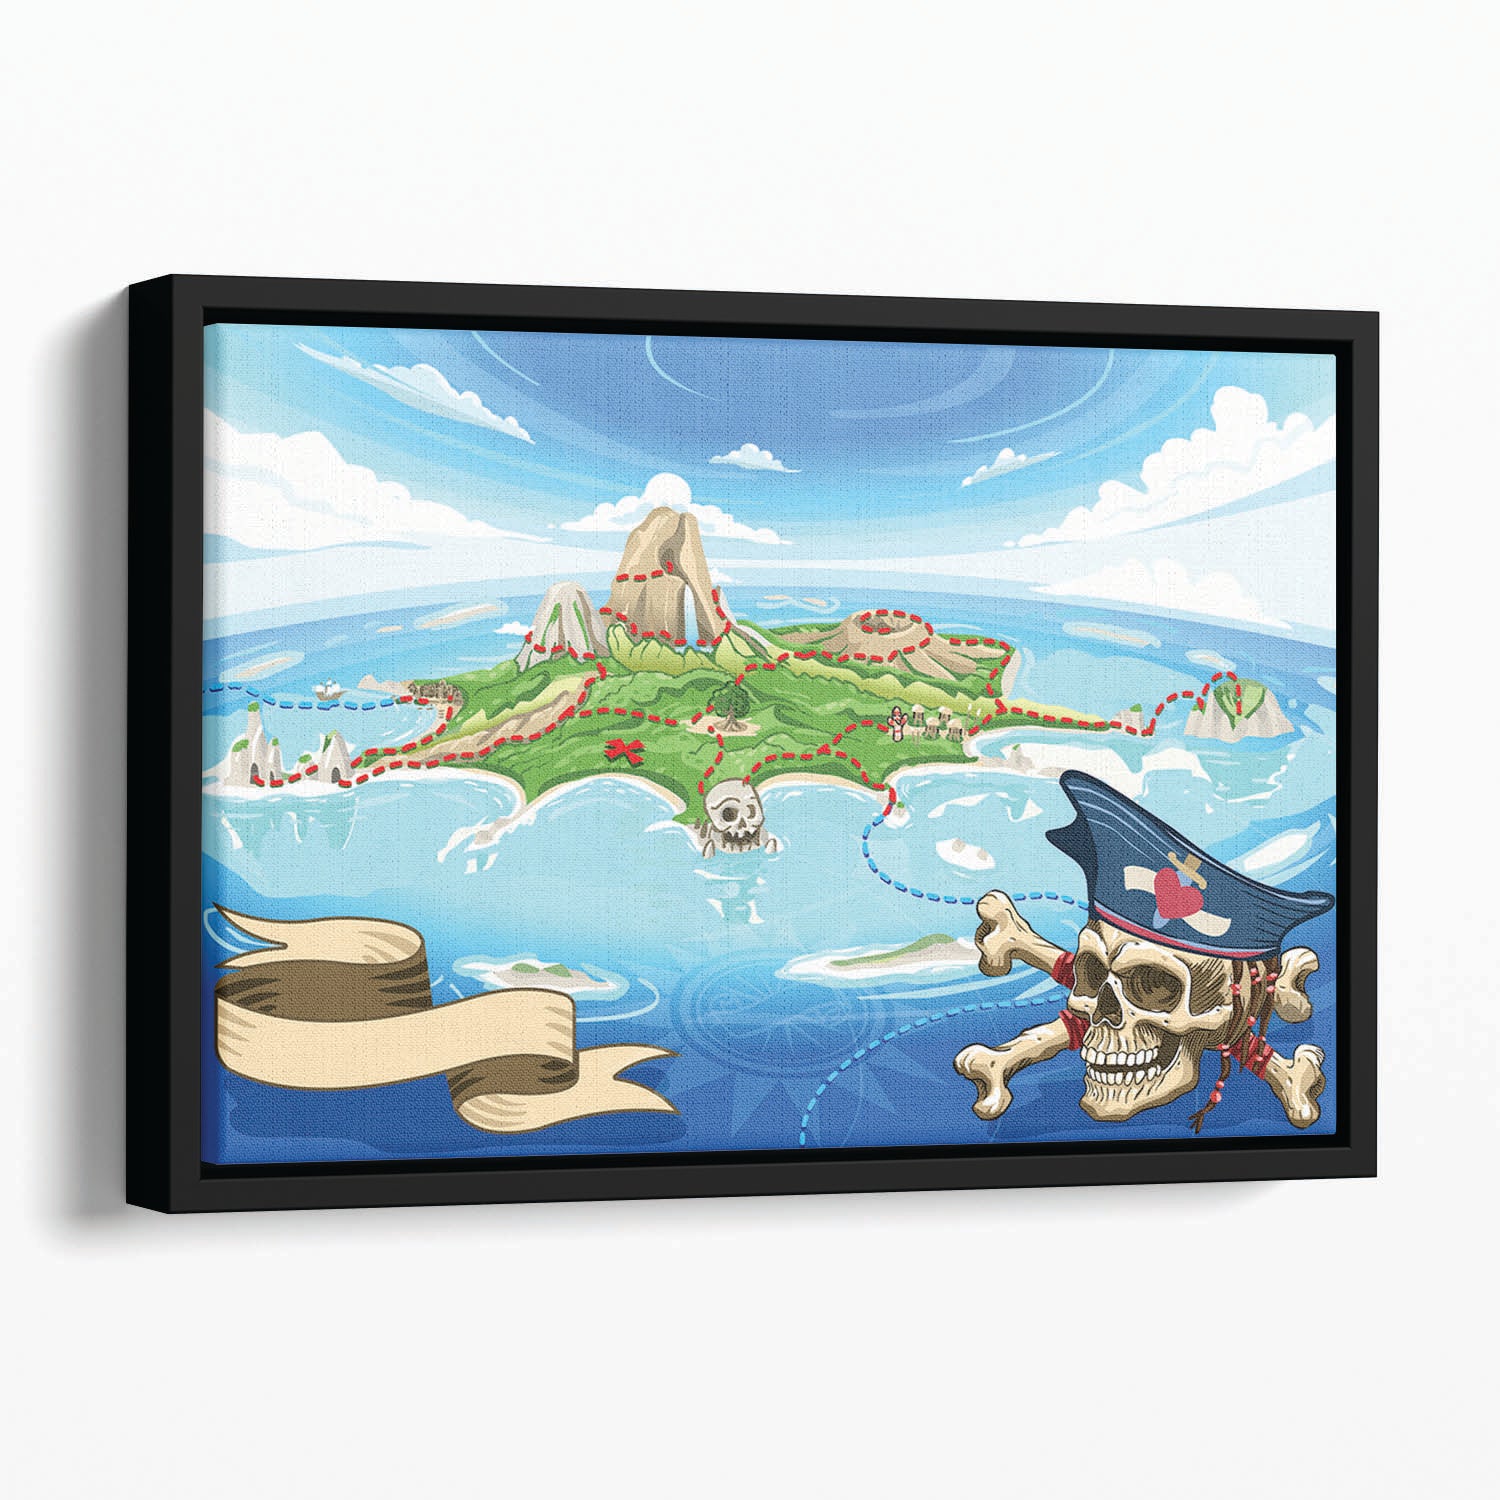 Pirate Cove Island Treasure Map Floating Framed Canvas